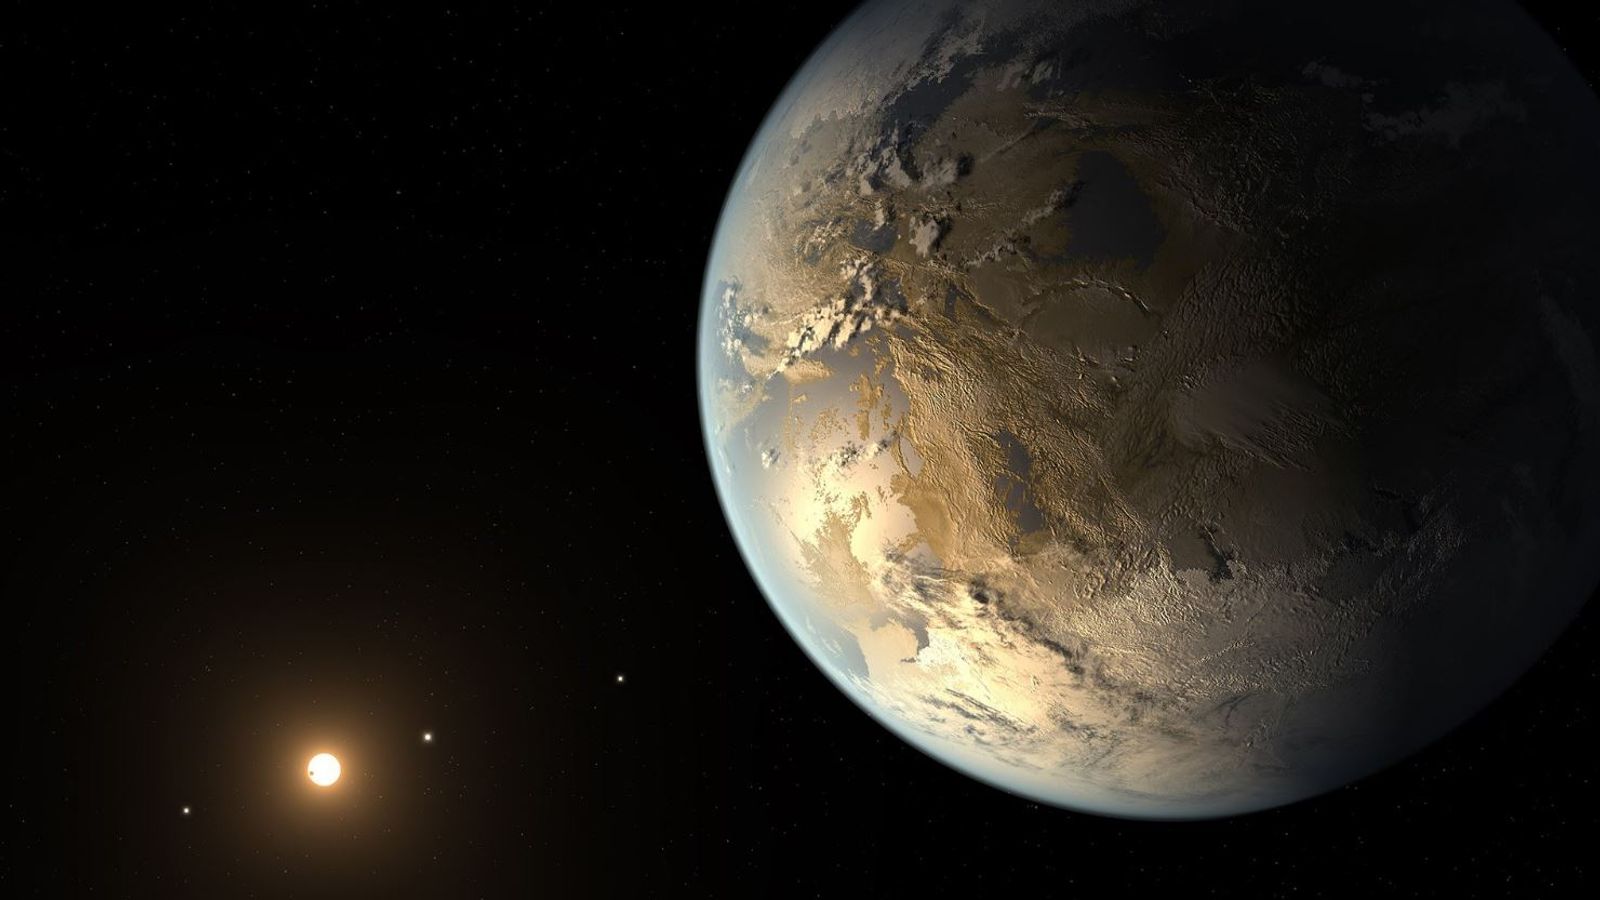 Super-earth 'most likely' candidate for hosting alien life